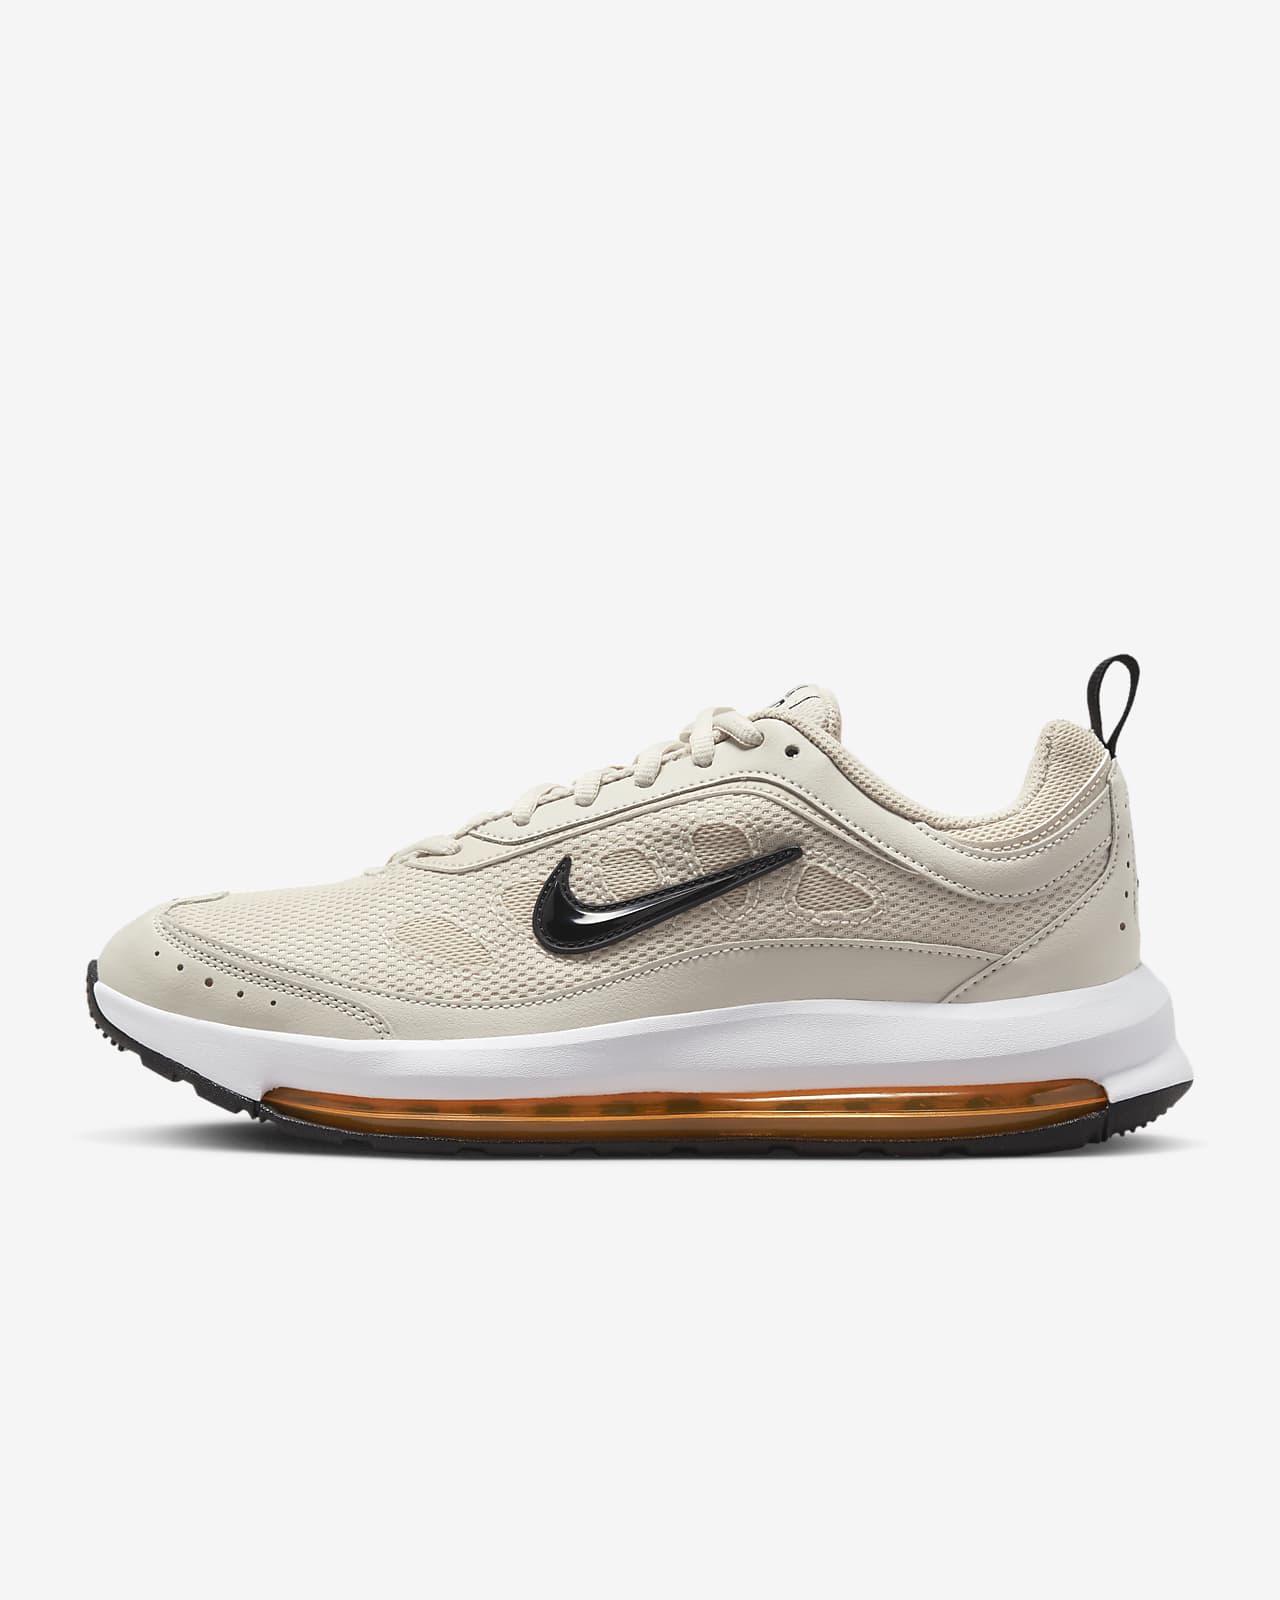 New NIKE Air Max Bolt Athletic Sneakers shoes Mens India | Ubuy-vietvuevent.vn